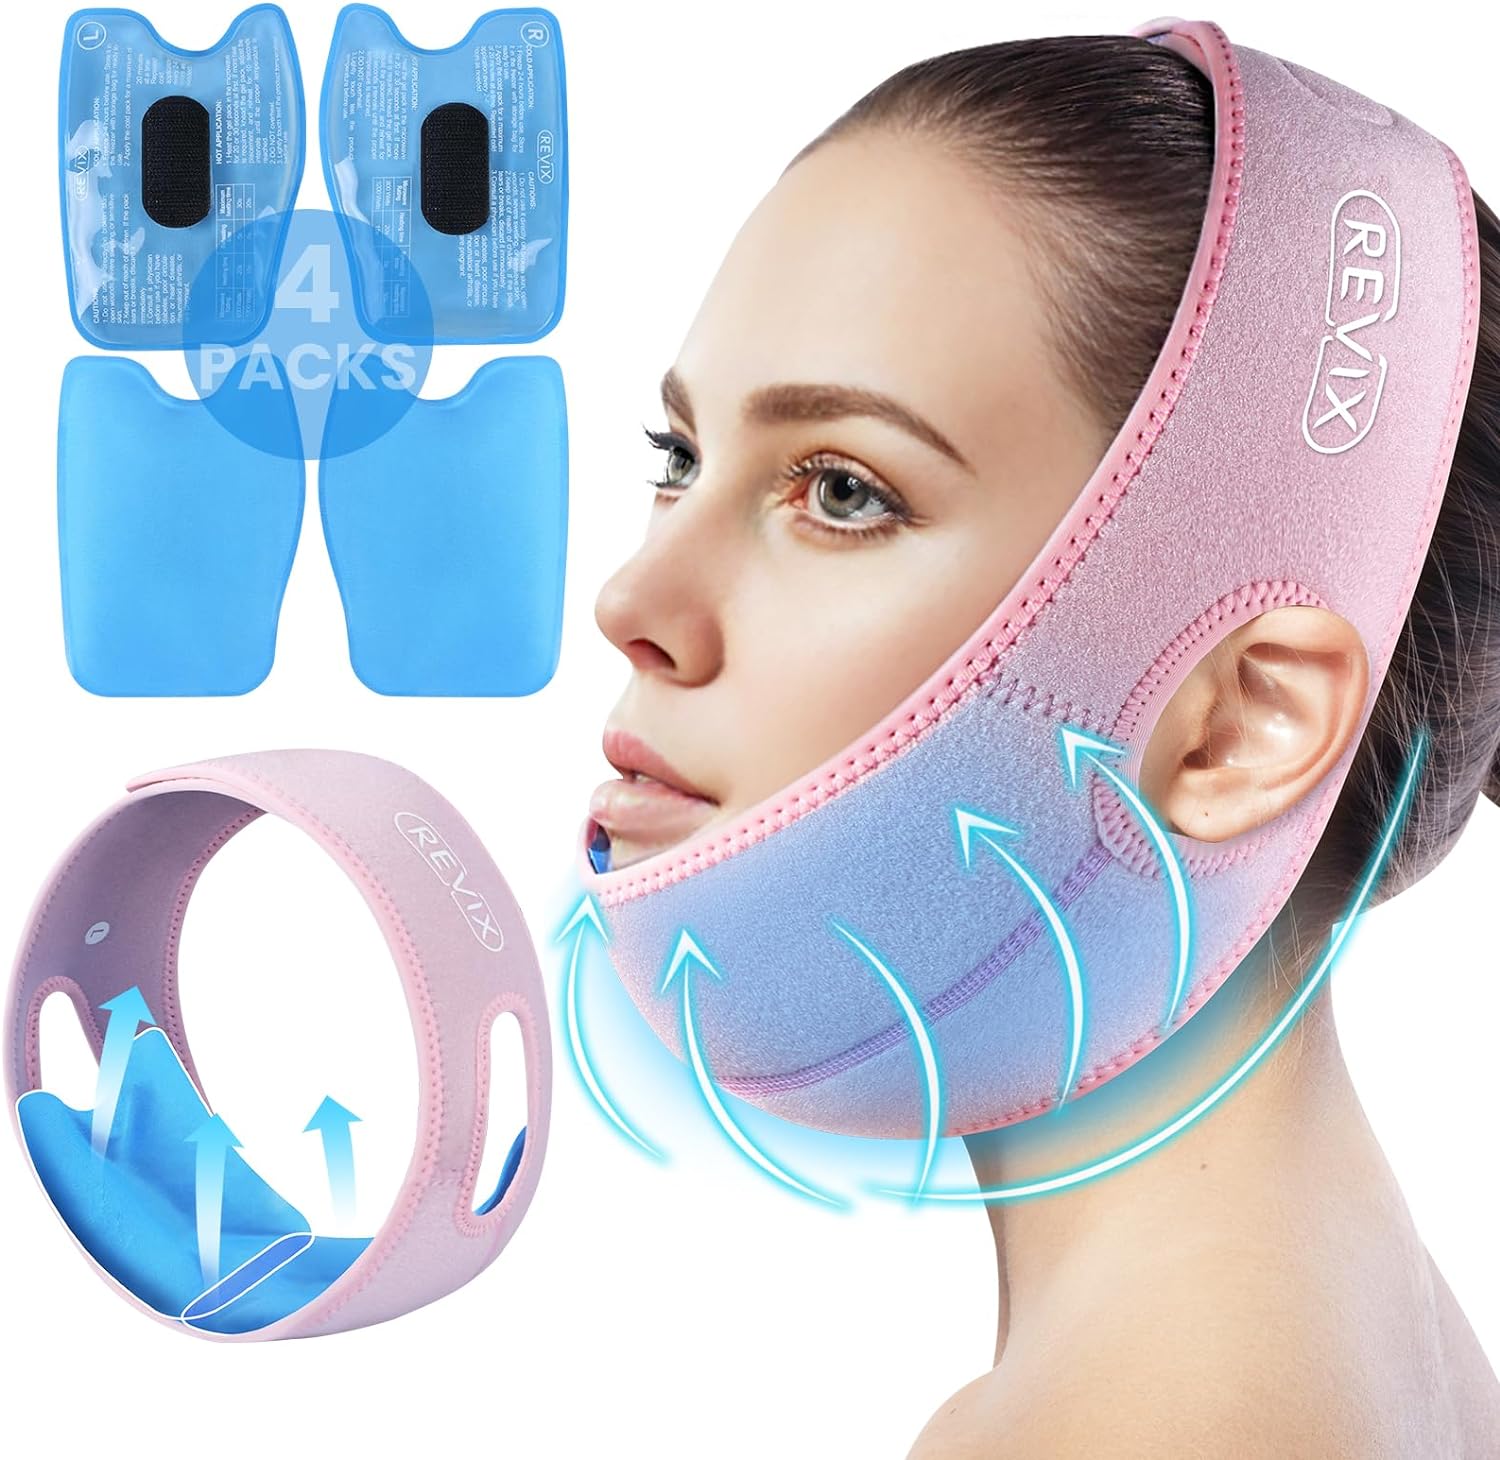 Buy pink REVIX Wisdom Tooth Ice Pack Wrap with 3D Sewing Design Face Ice Pack for Jaw Pain Relief